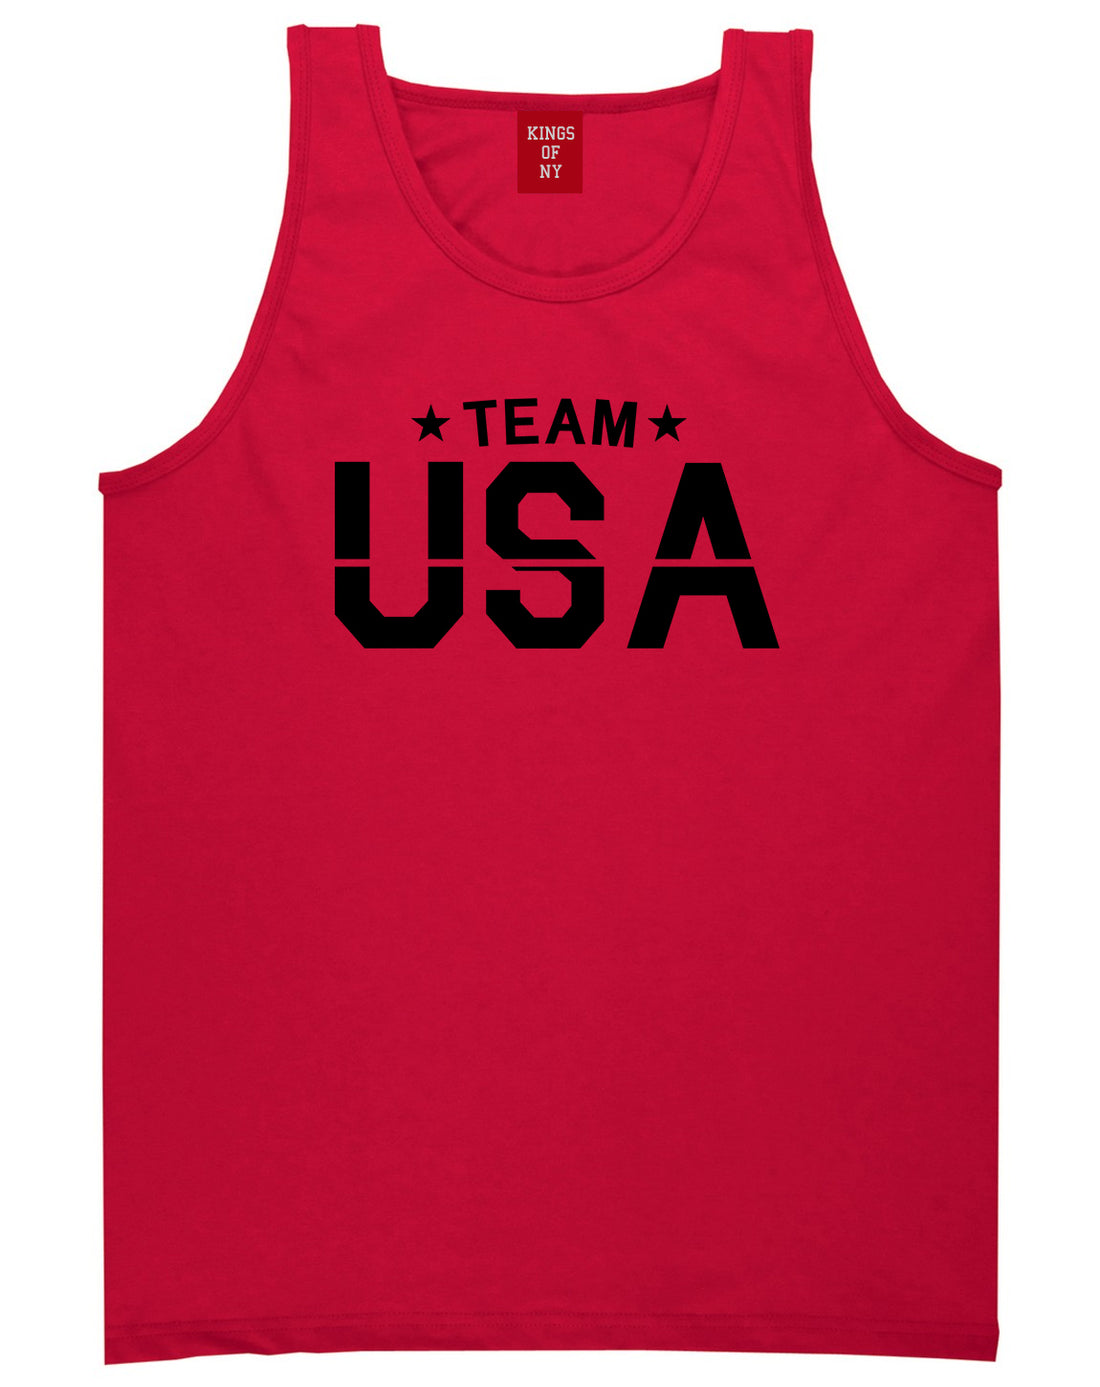 Team USA Mens Tank Top Shirt Red by Kings Of NY